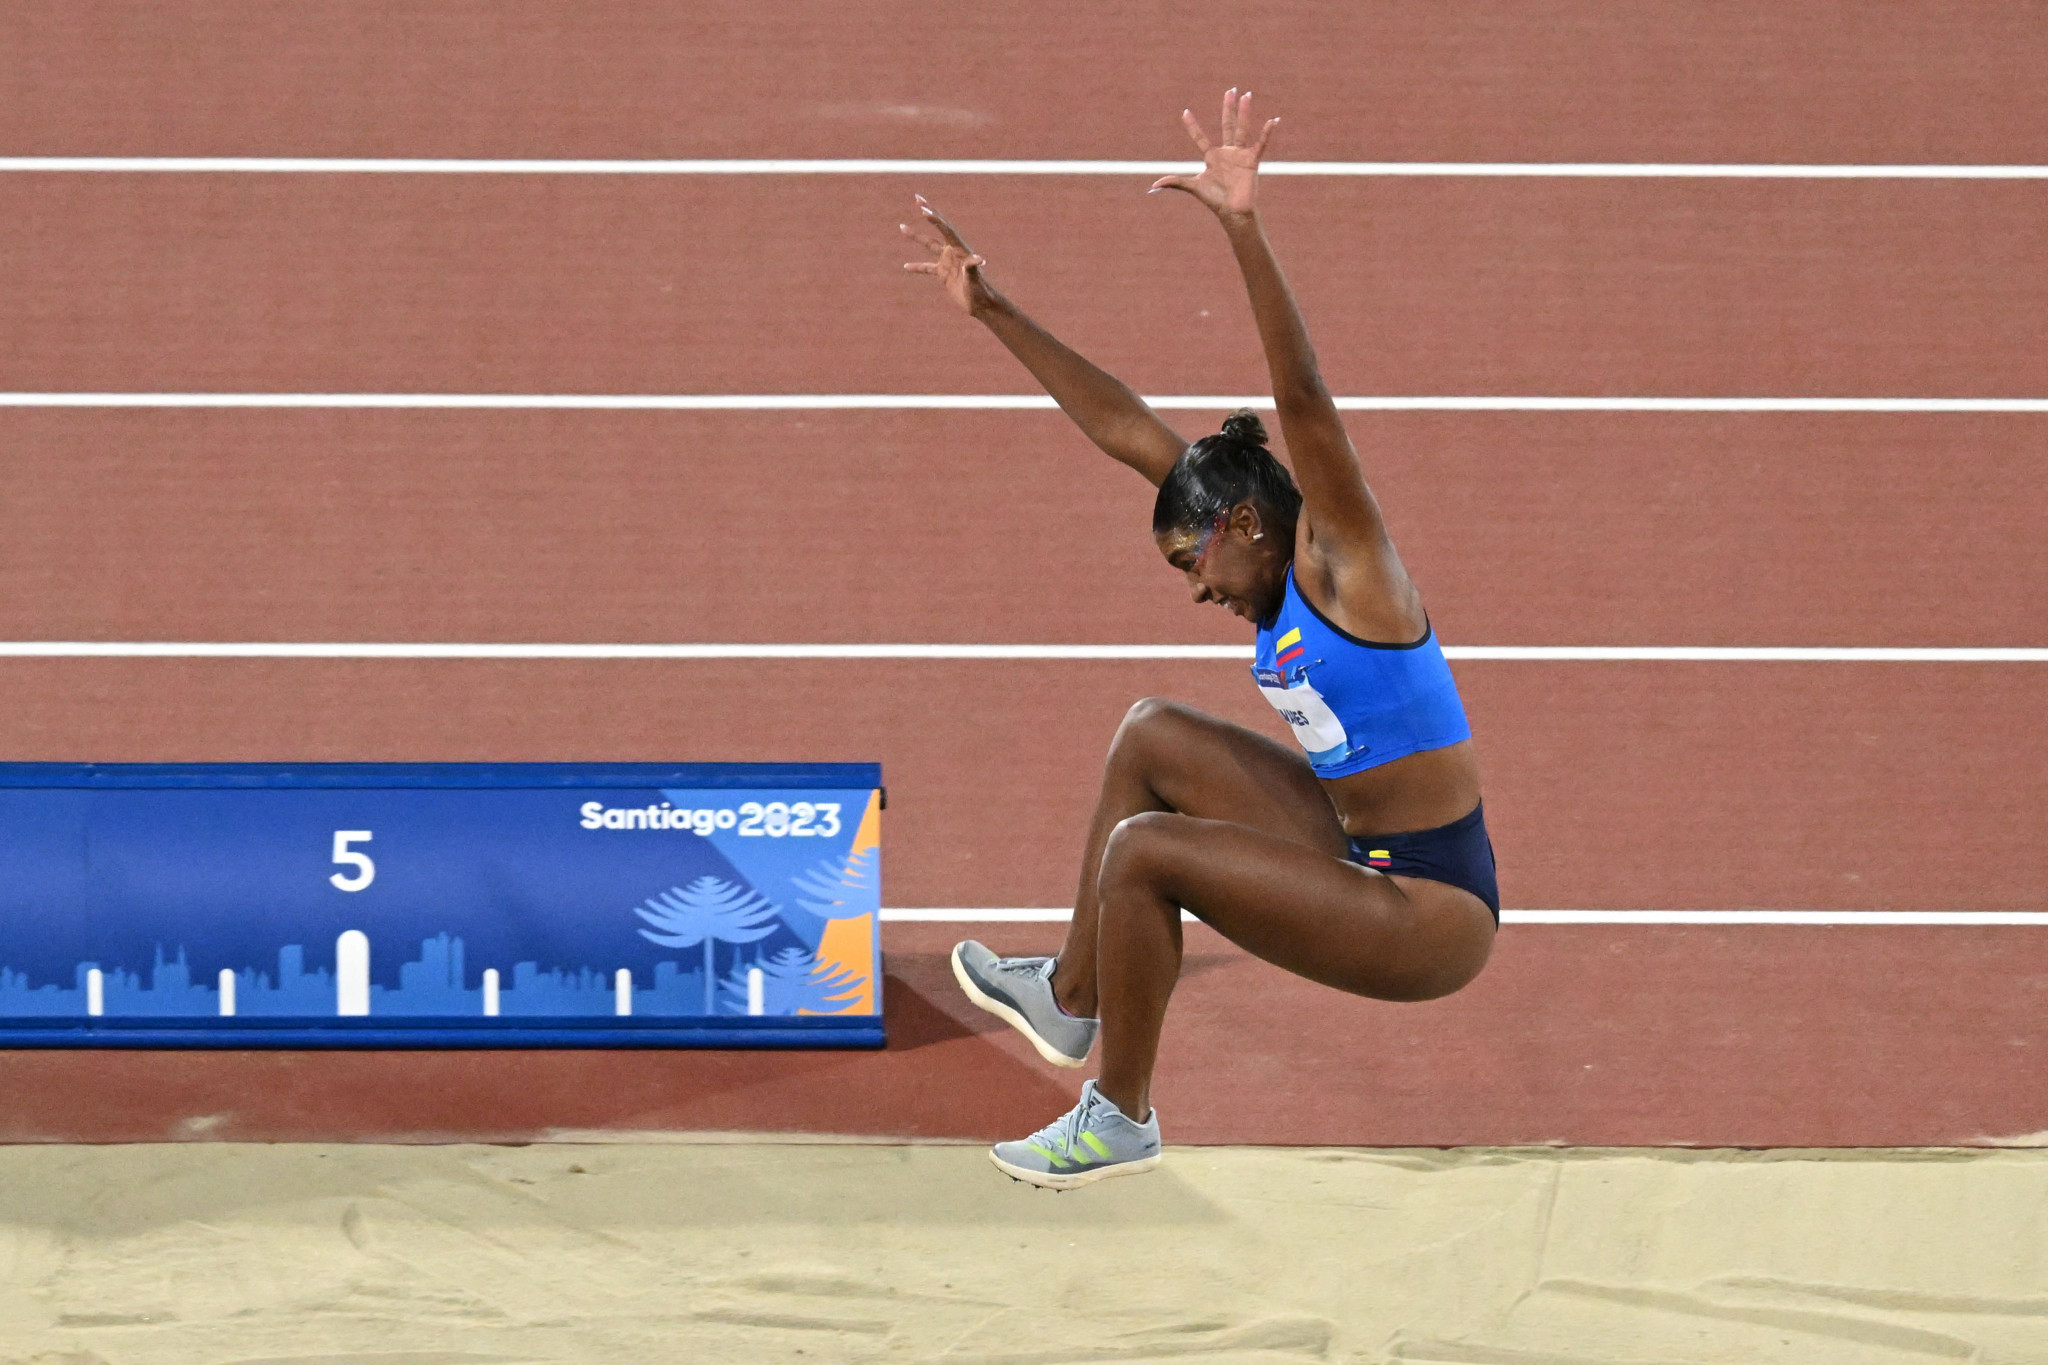 Colombia's Natalia Carolina Linares Gonzalez won the women's long jump final with a leap of 6.66 metres ©Getty Images

